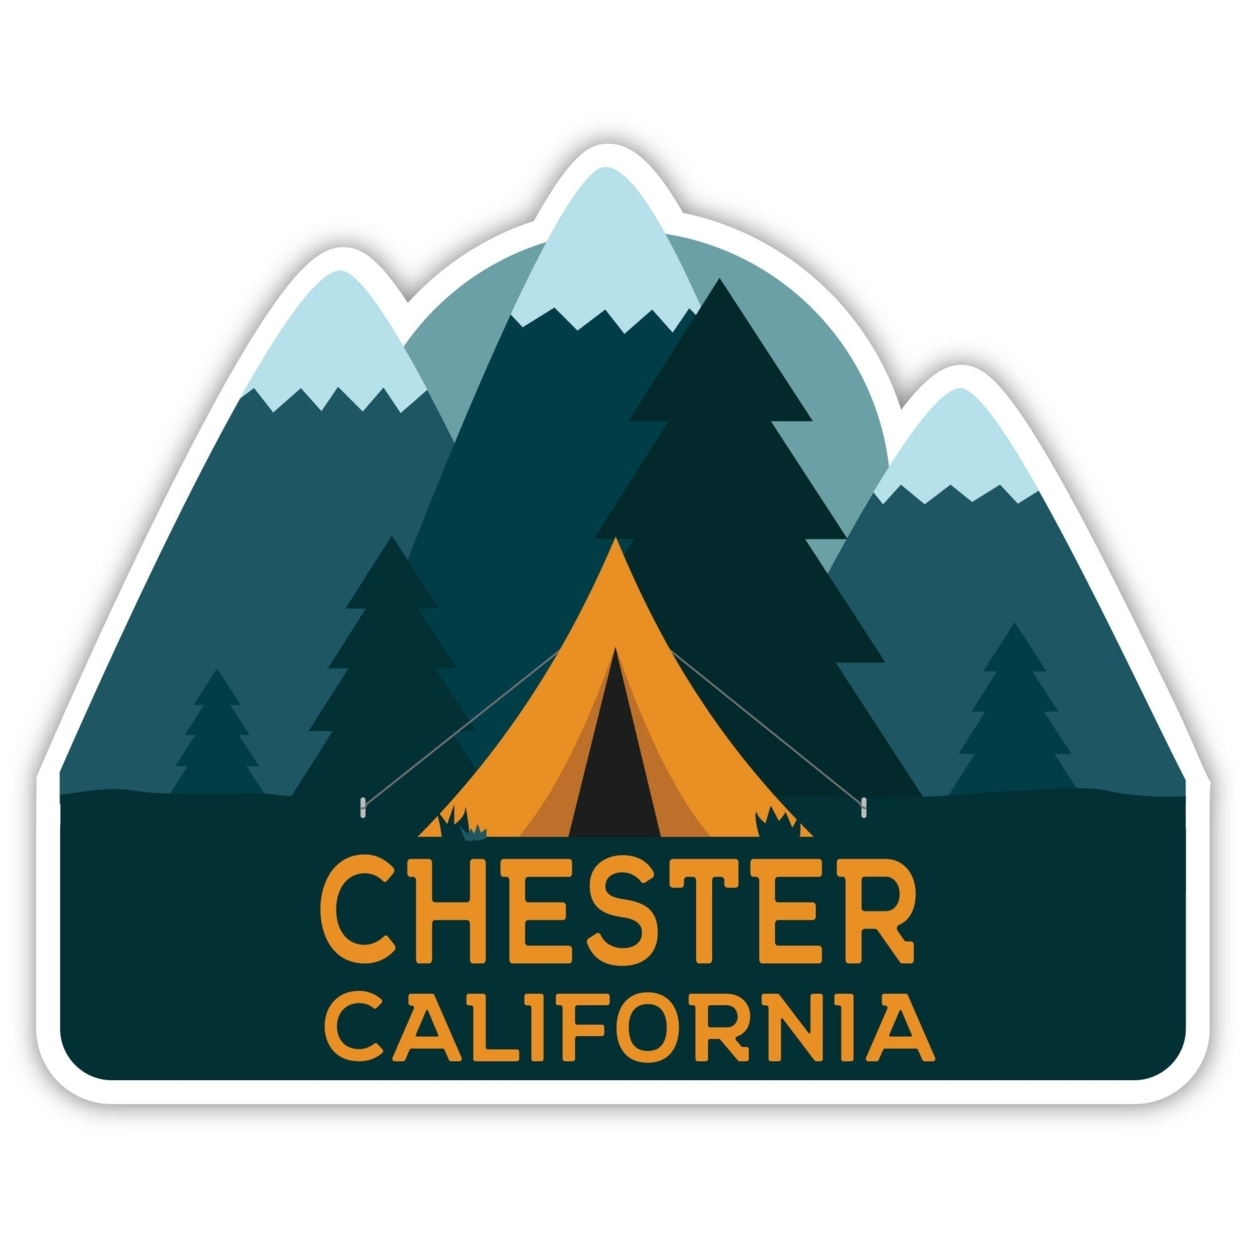 Chester California Souvenir Decorative Stickers (Choose Theme And Size) - 4-Pack, 10-Inch, Tent